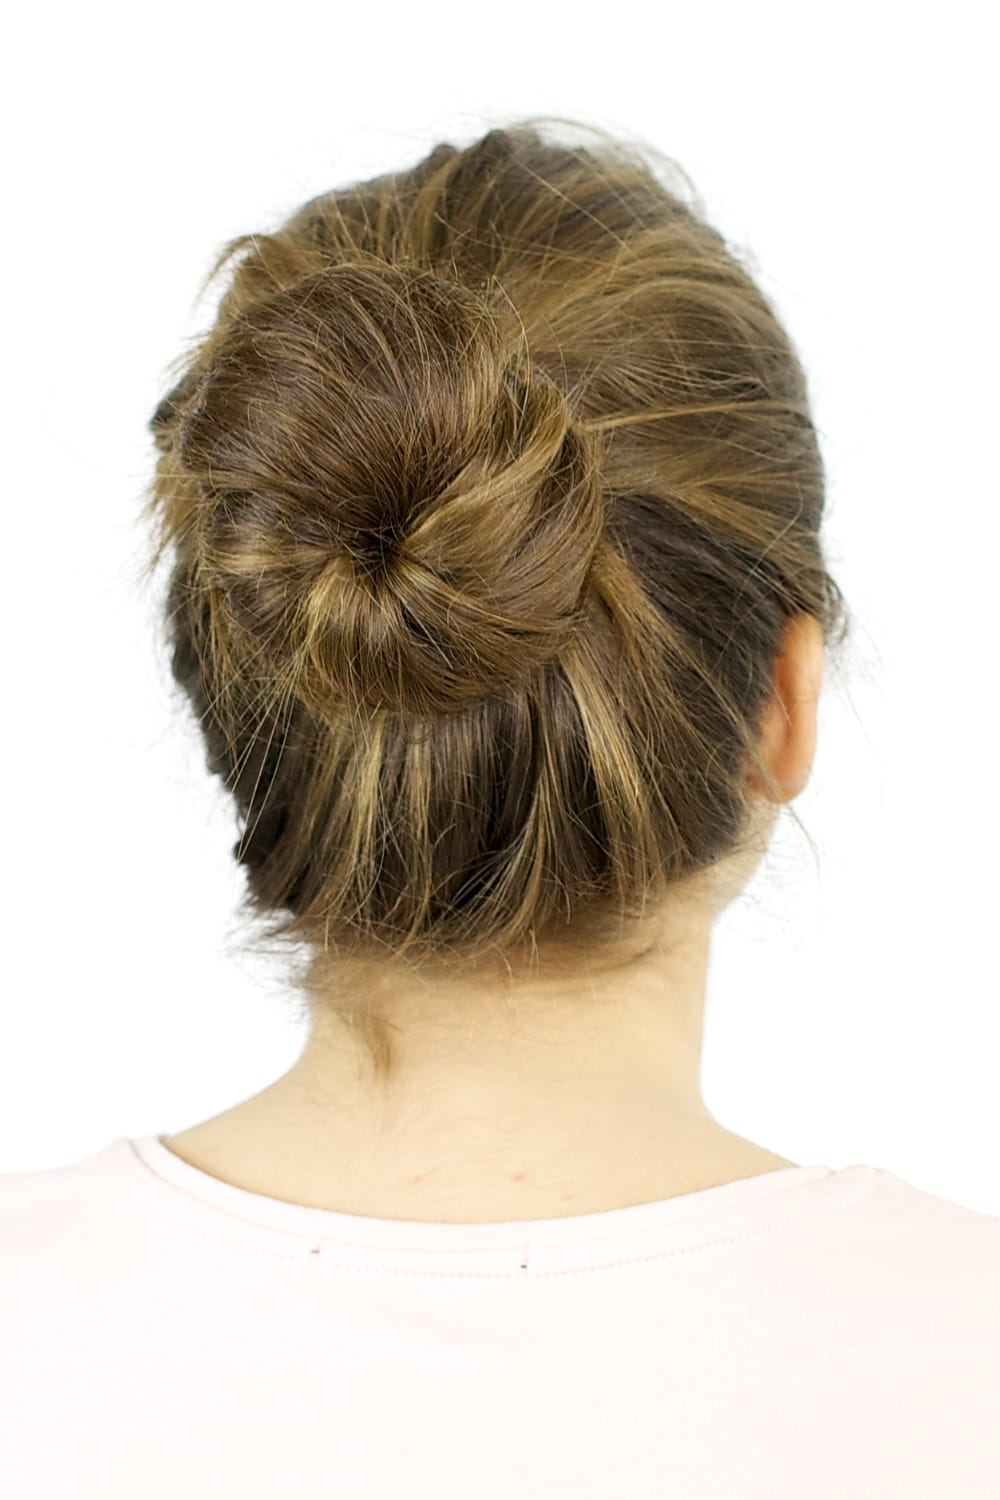 how to refresh hair after workout - tie hair in a bun